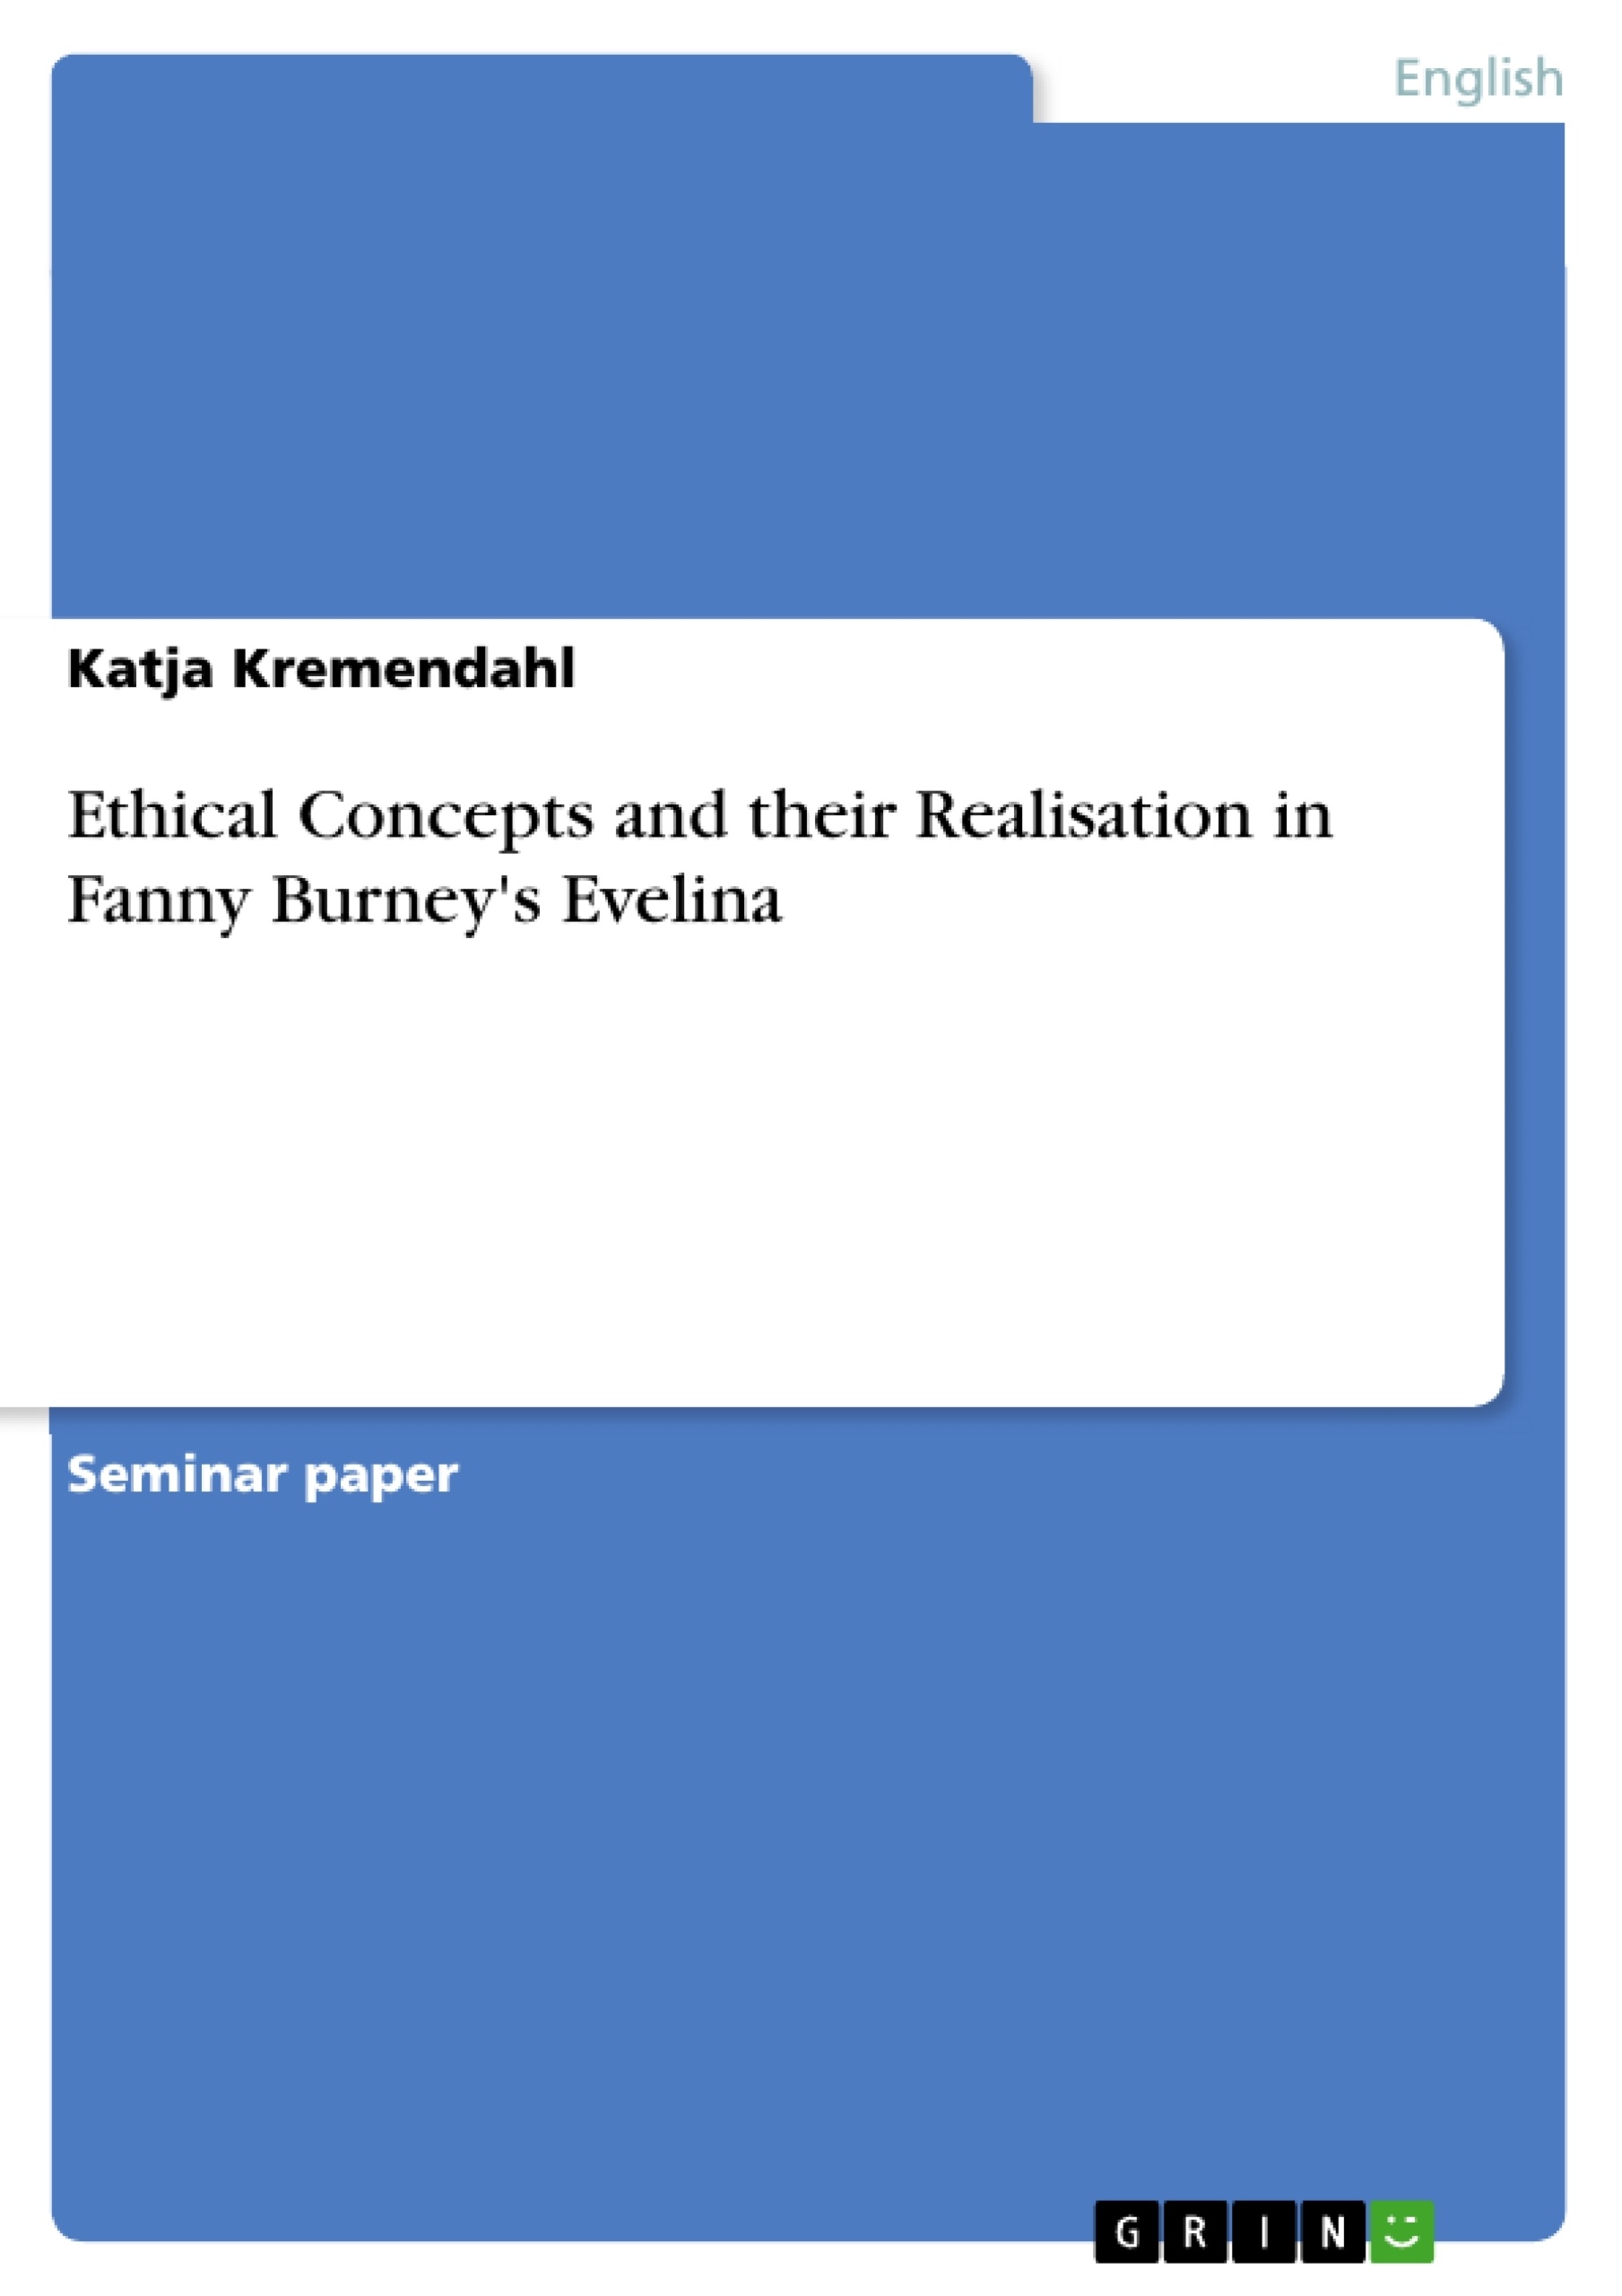 Título: Ethical Concepts and their Realisation in Fanny Burney's Evelina